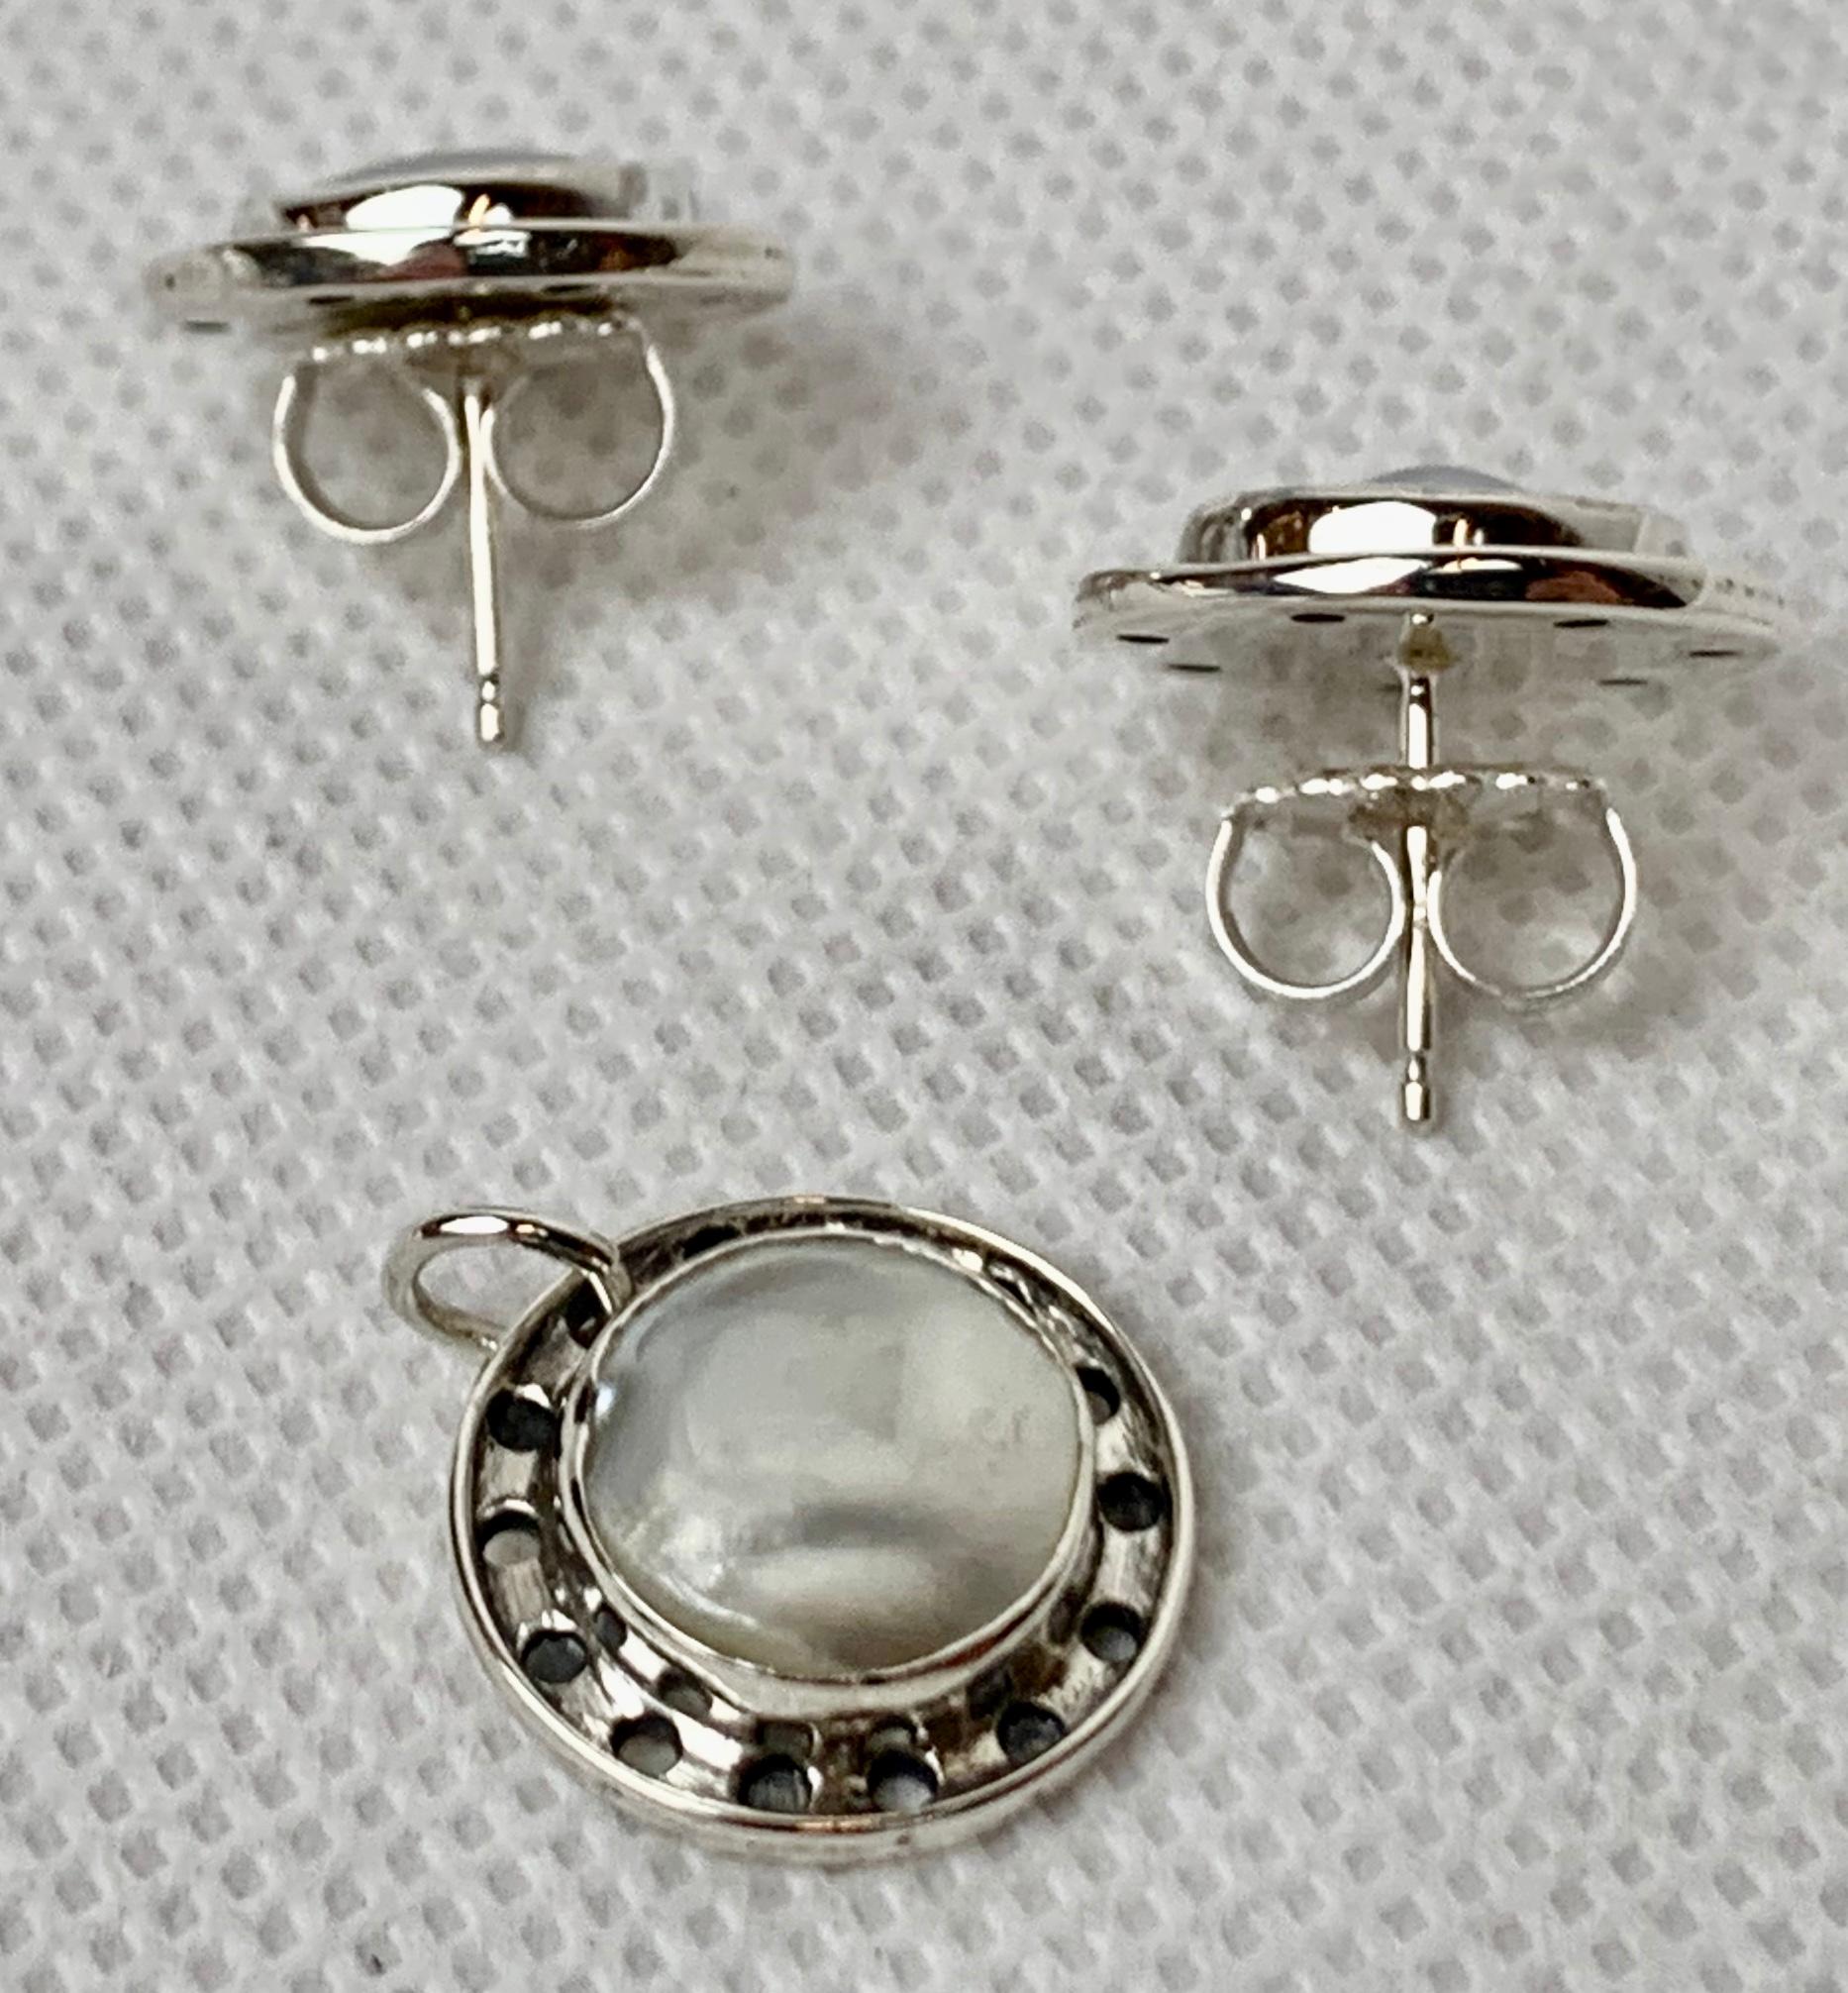 Period Arts and Crafts pierced earrings with matching pendant hand crafted in sterling silver with natural mabé pearls.
Professionally cleaned and polished by hand.
Diameter-5/8